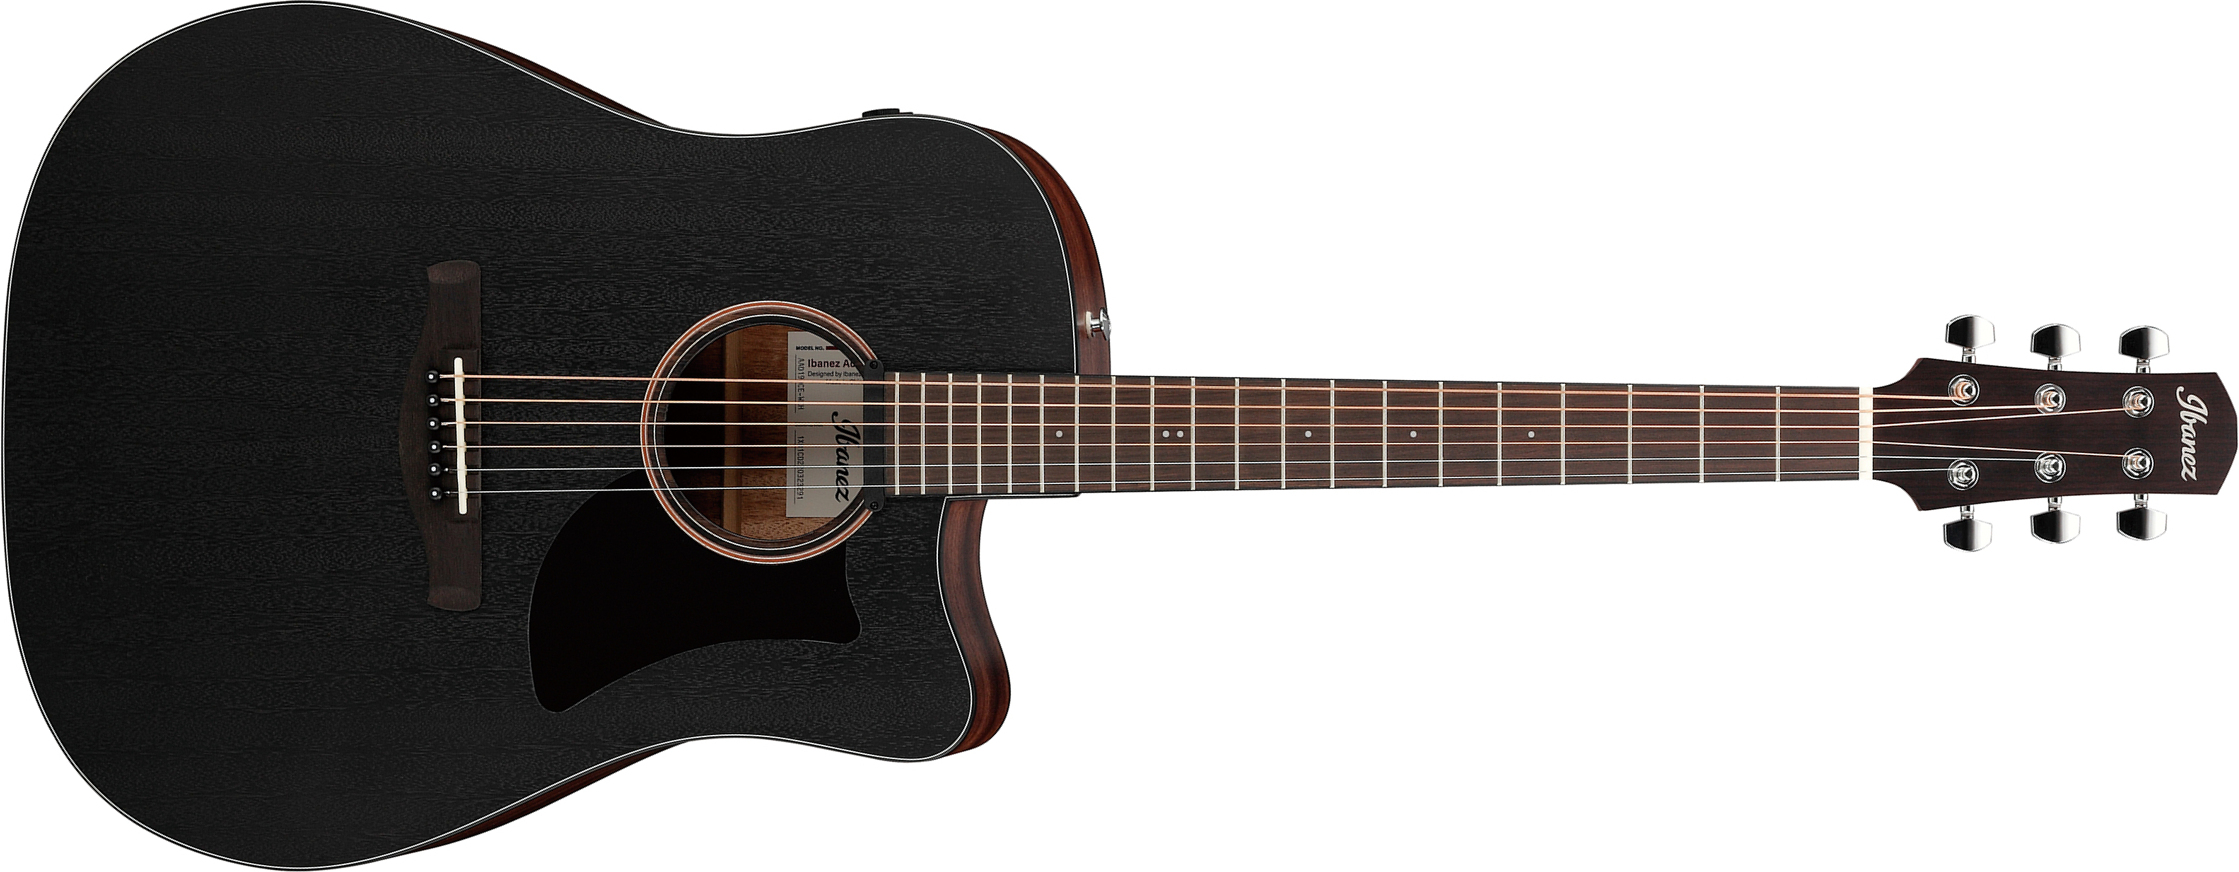 Ibanez Aad190ce Wkh Advanced Dreadnought Cw Tout Okoume Ova - Weathered Black Open Pore - Electro acoustic guitar - Main picture